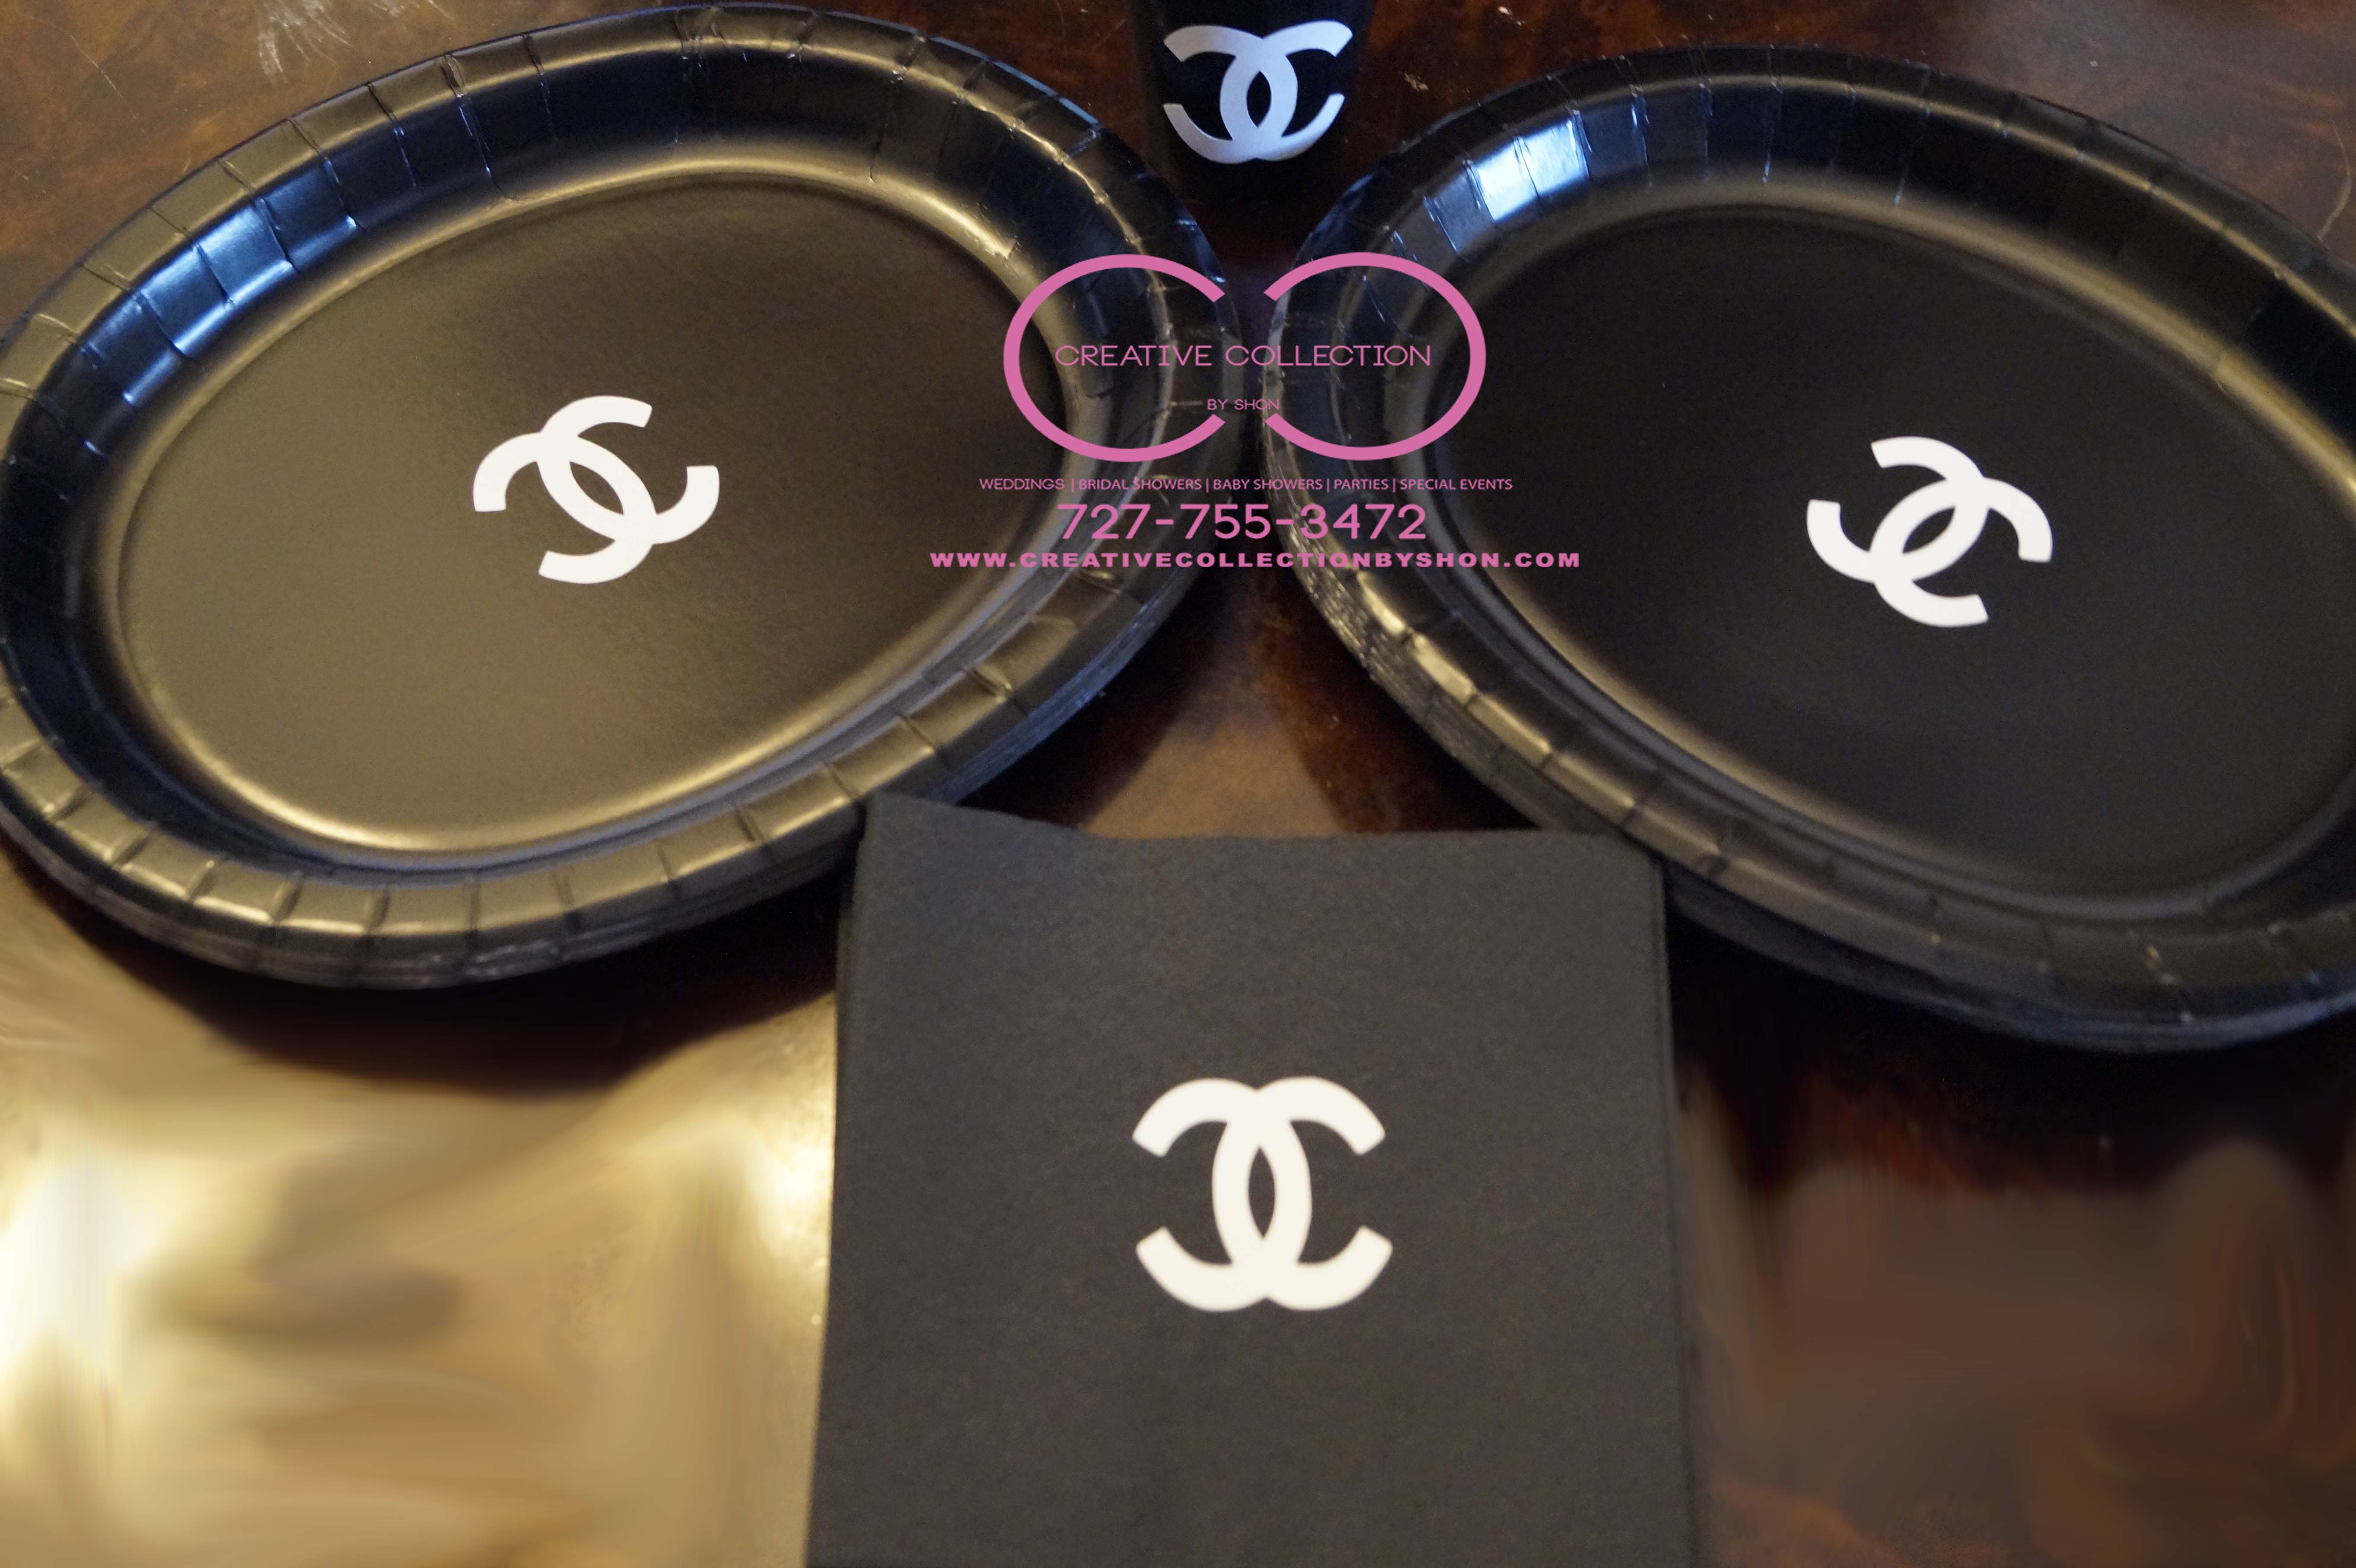 Parisian “Chanel” Inspired Plates – Creative Collection by Shon